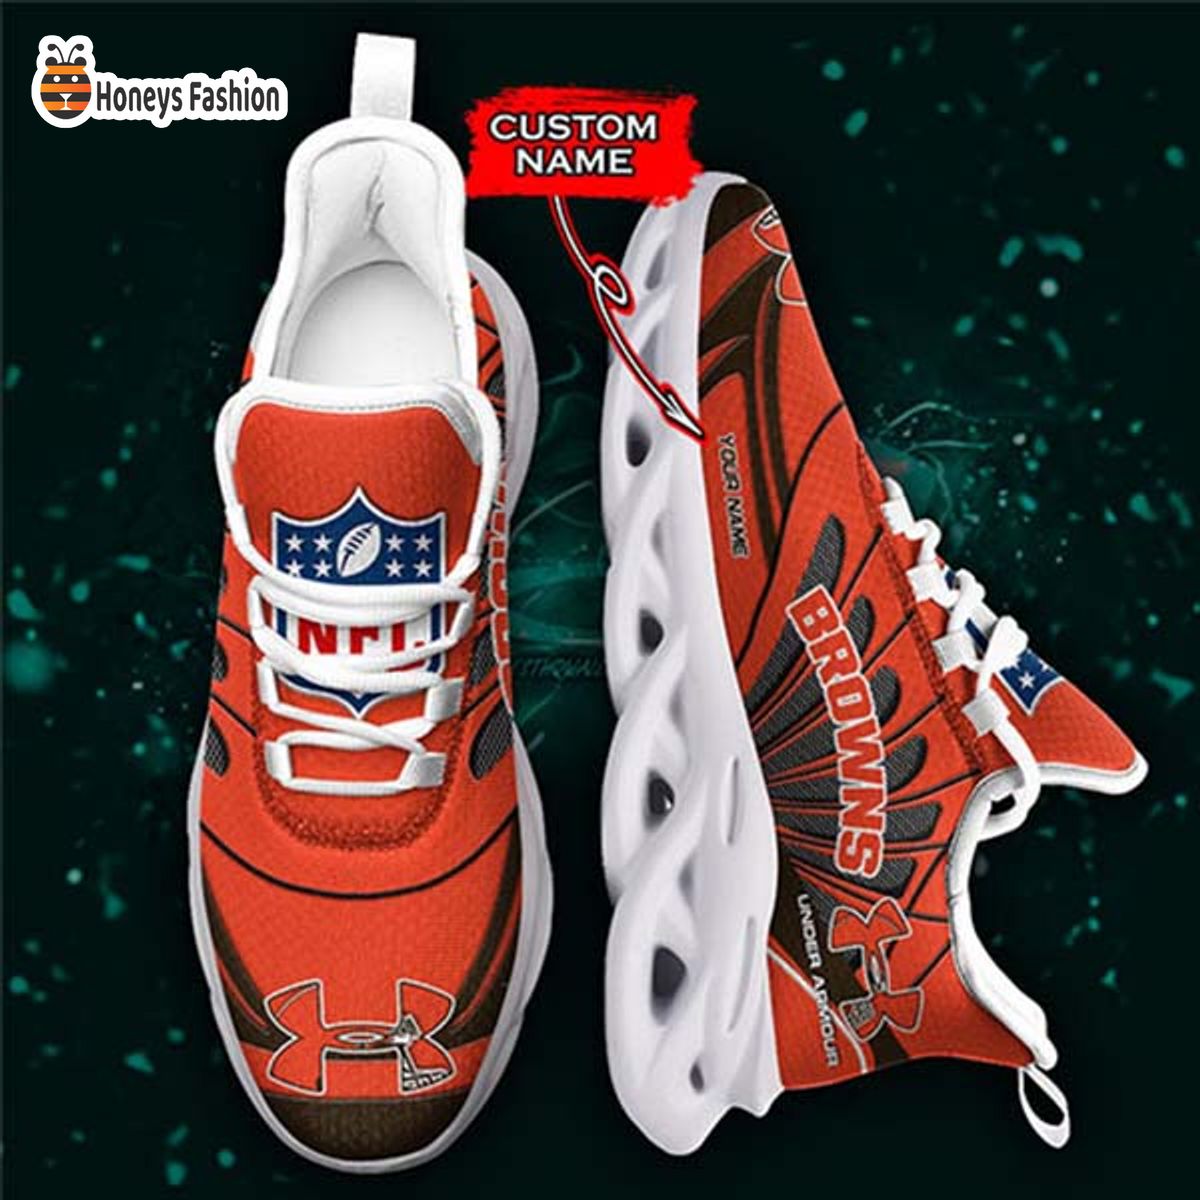 Cleveland Browns Under Armour Custom Name Max Soul Sneaker